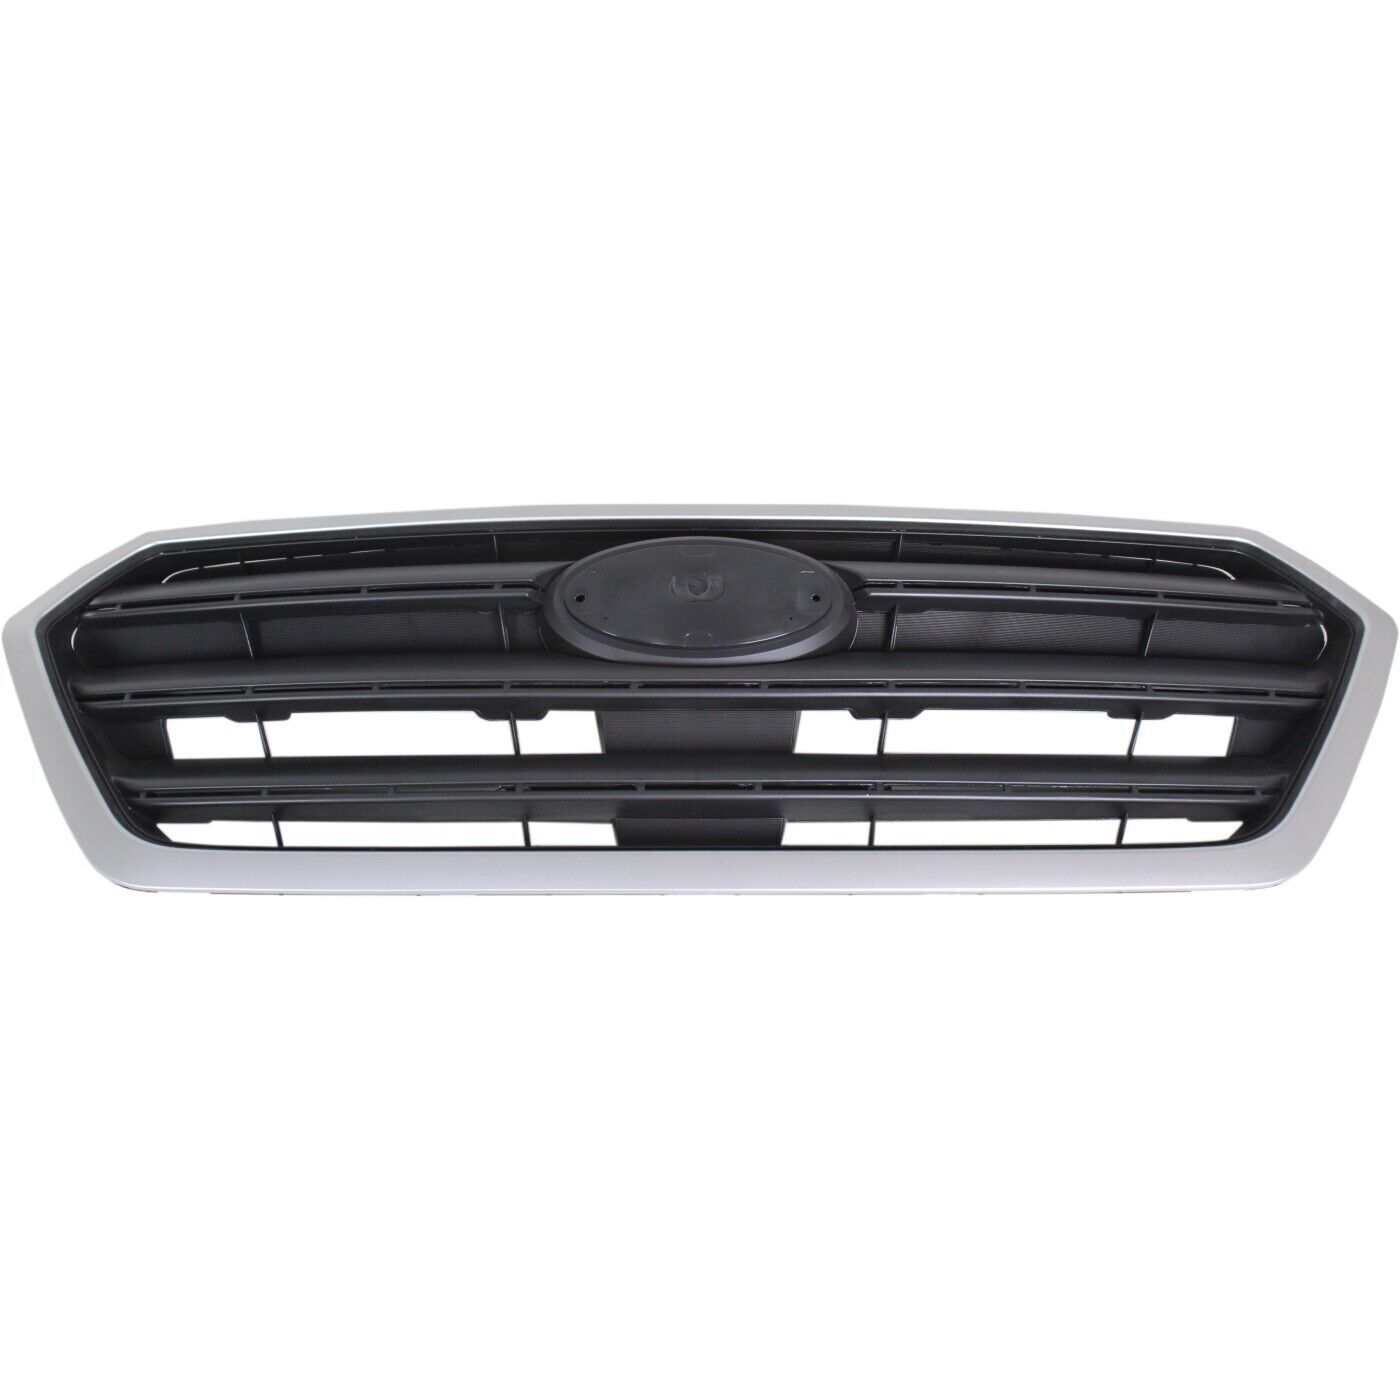 NEW Front Grille For 2015-2017 Subaru Legacy SHIPS TODAY